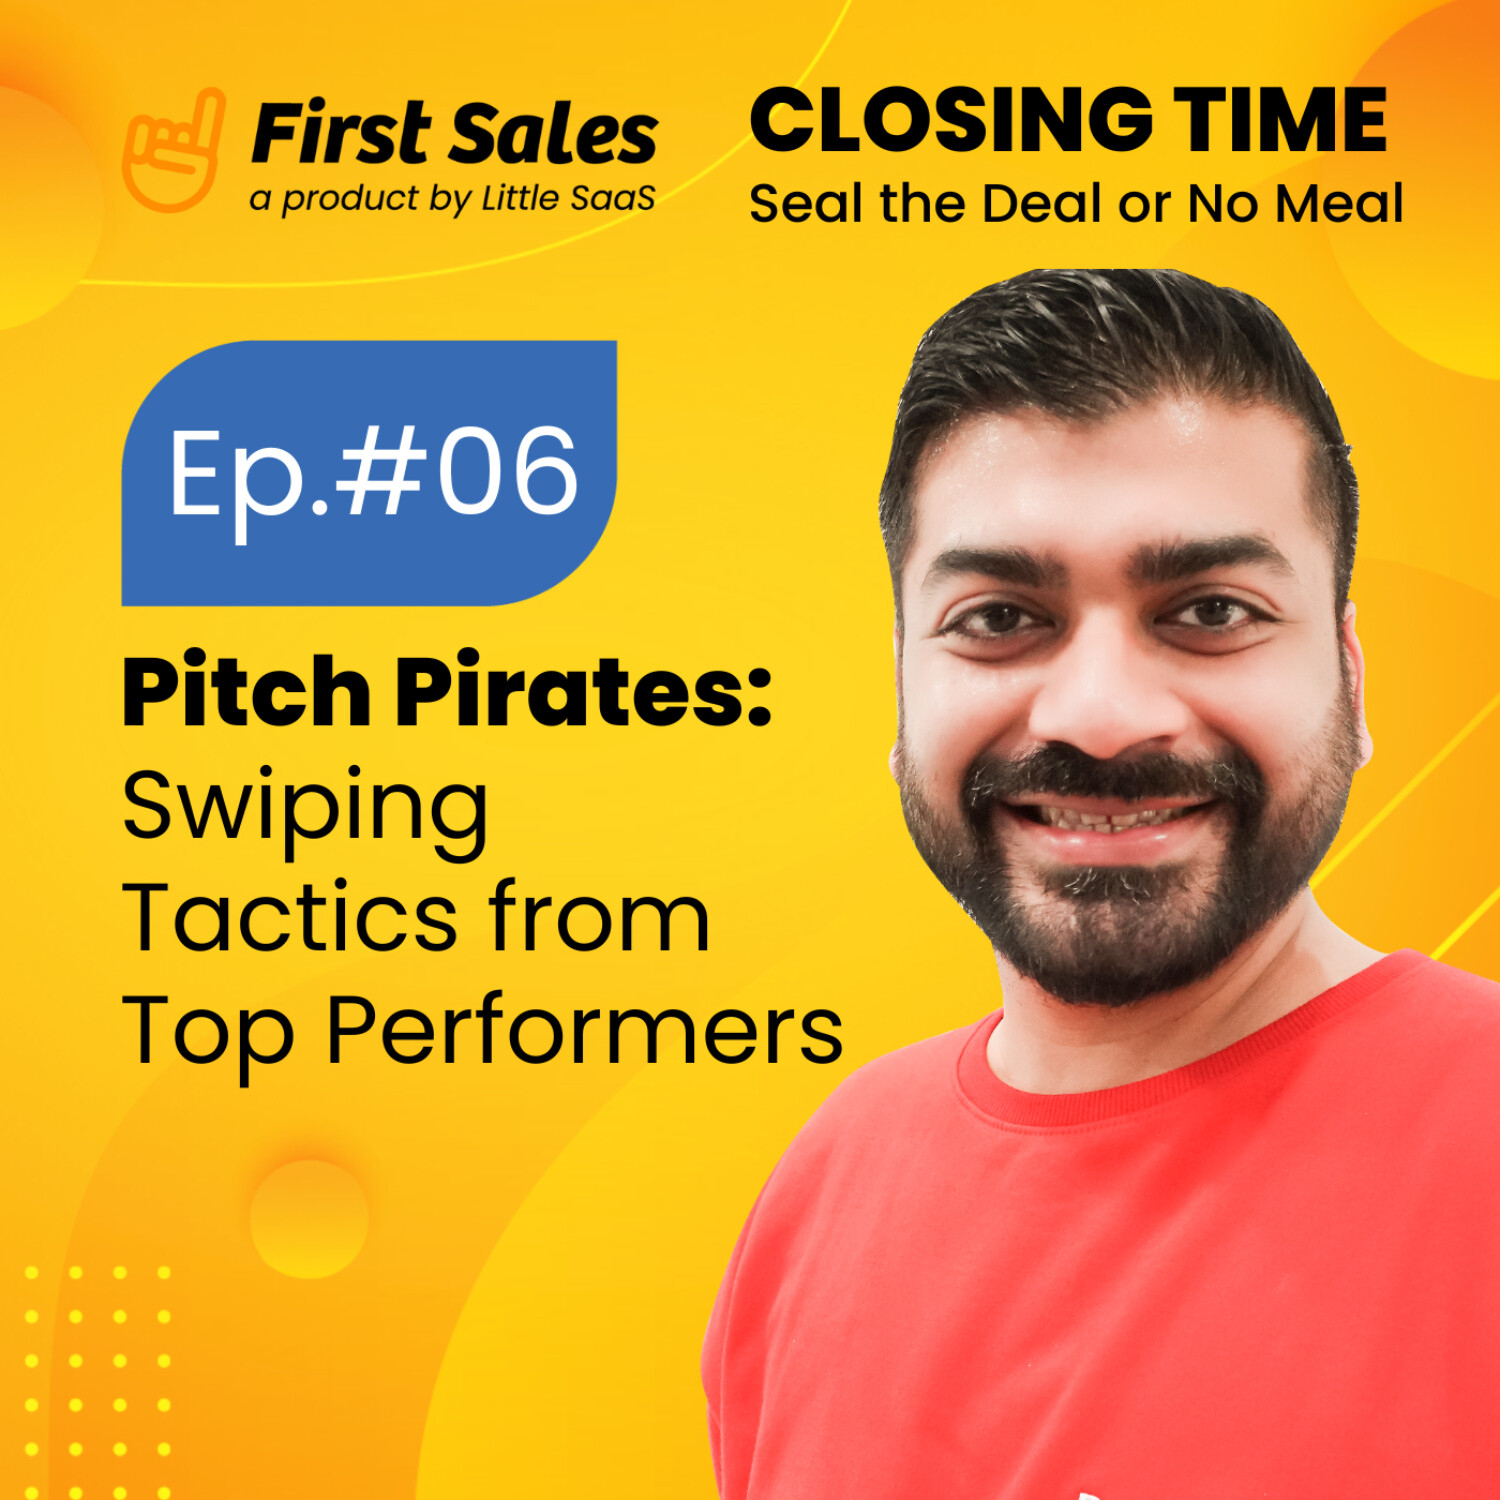 Pitch Pirates: Swiping Tactics from Top Performers